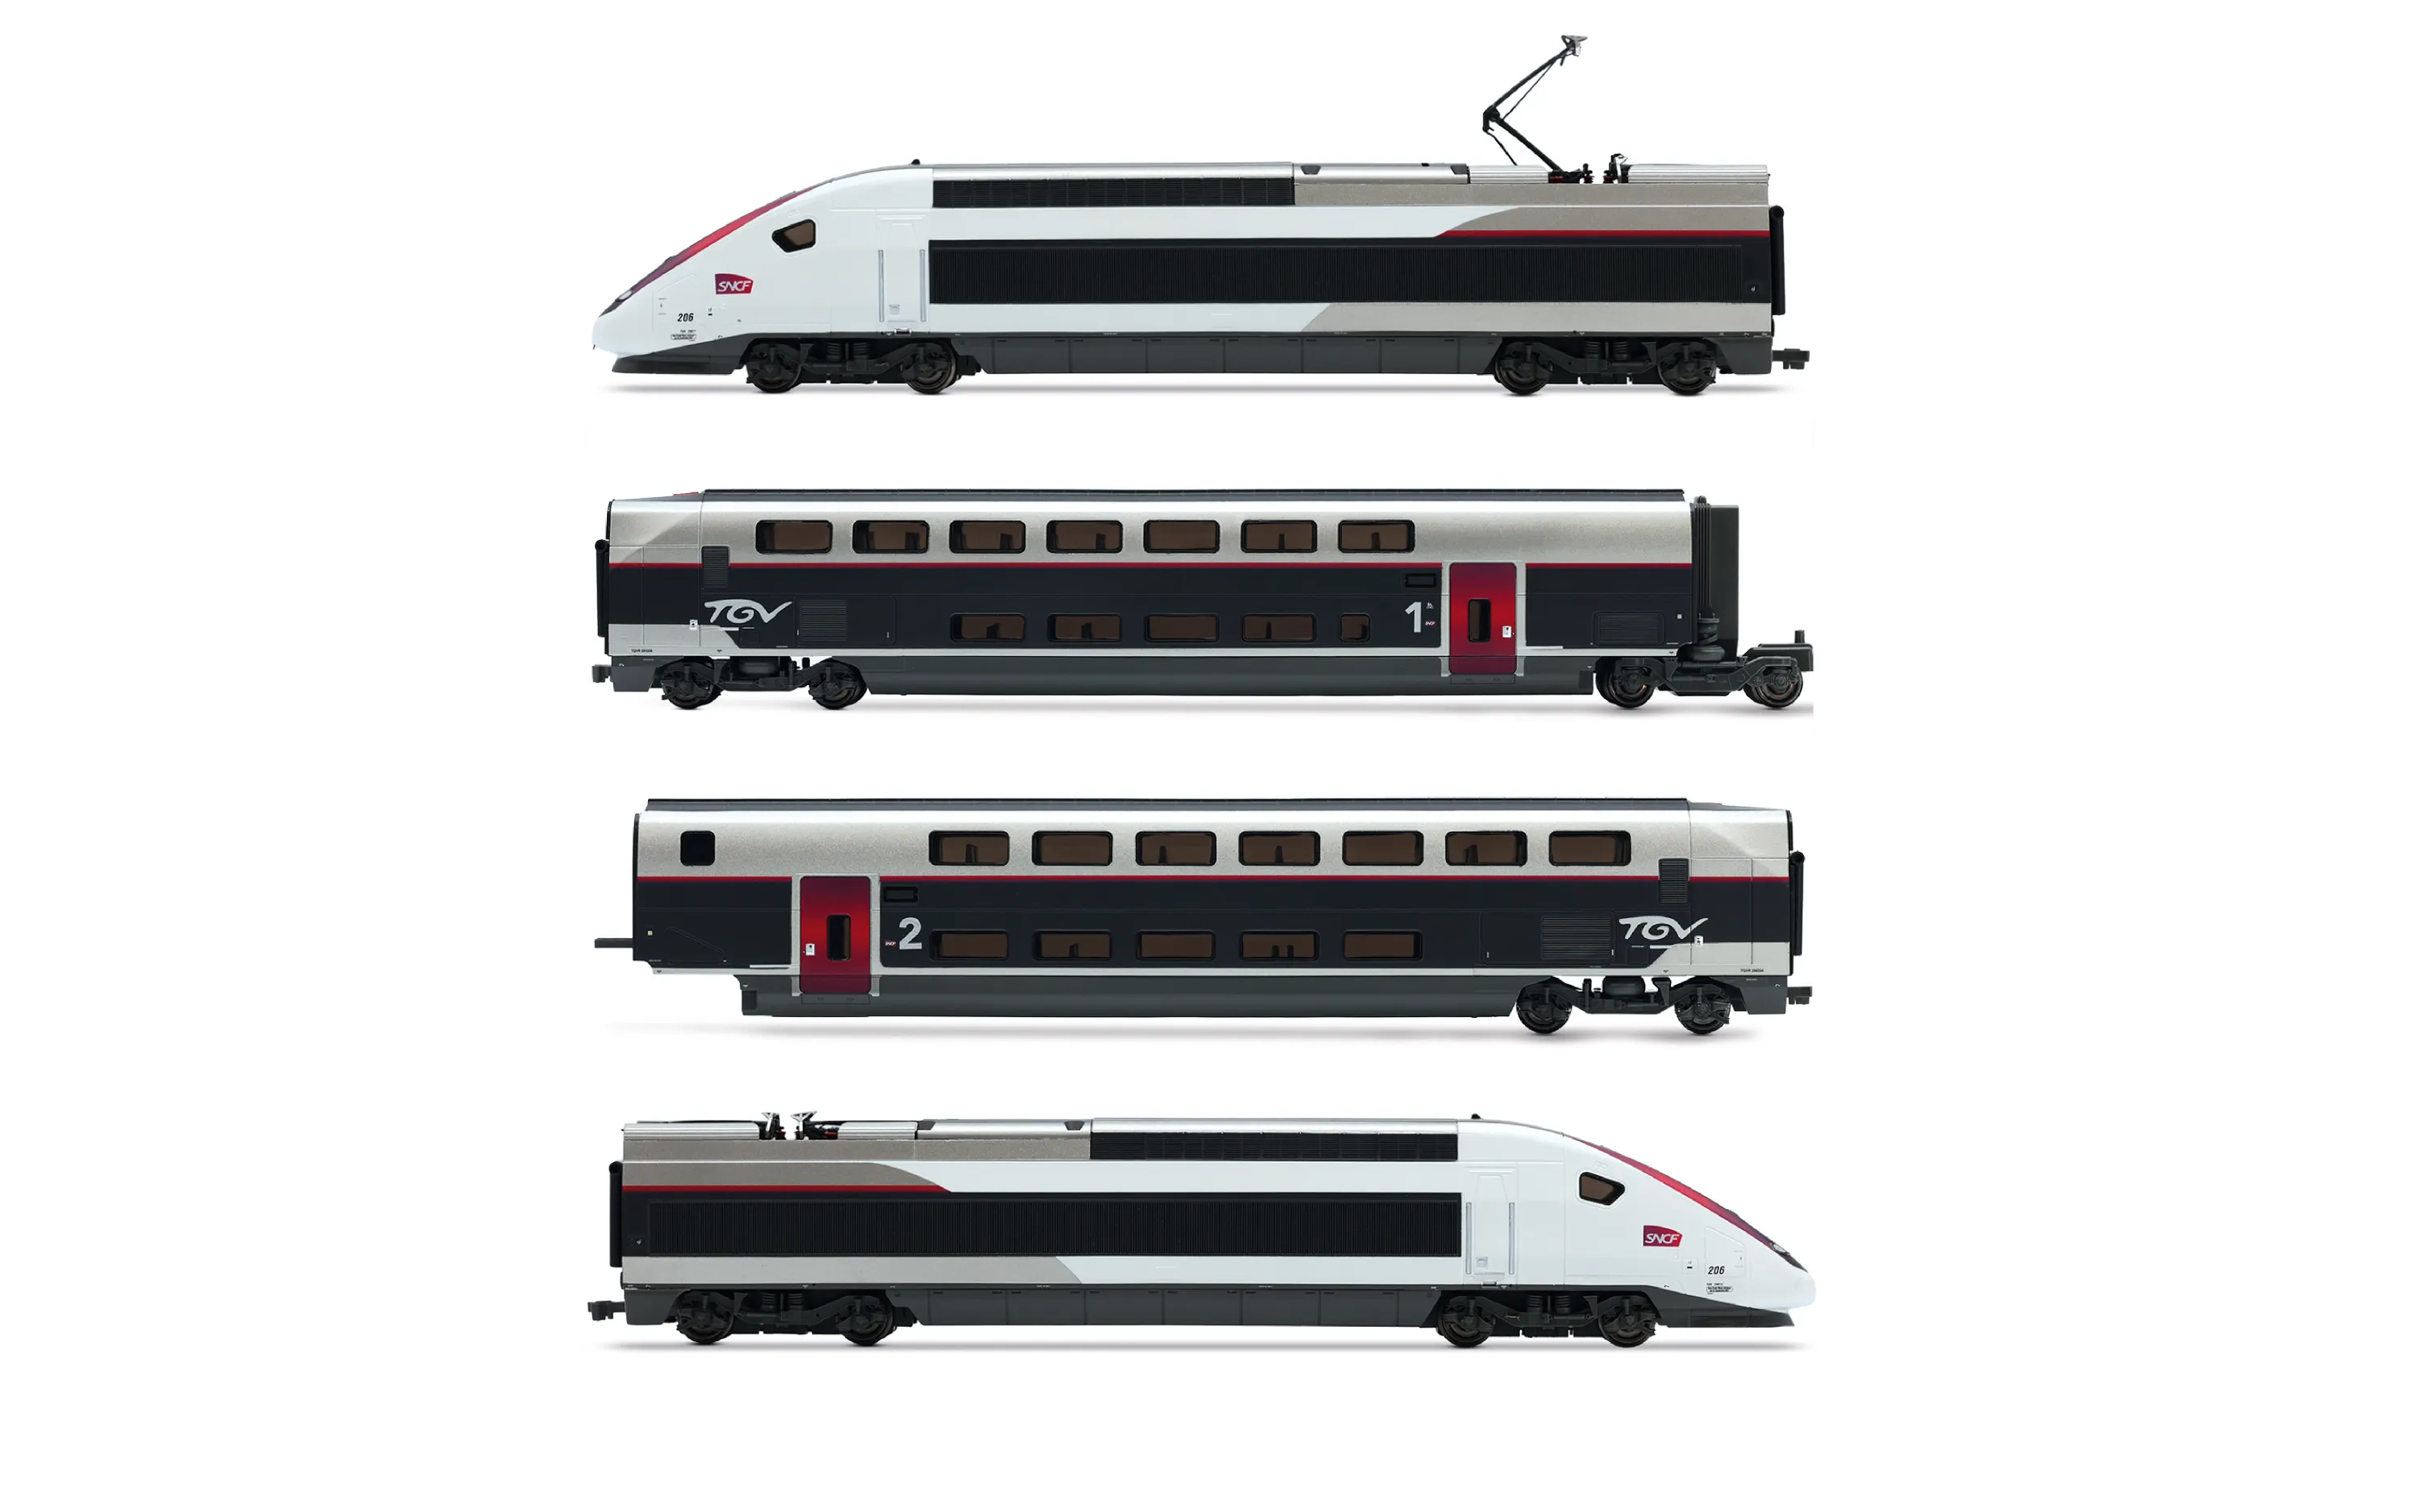 TGV Duplex Carmillon, 4-unit pack with loco, dummy loco and 2 end coaches, ep. VI, with DCC sound decoder